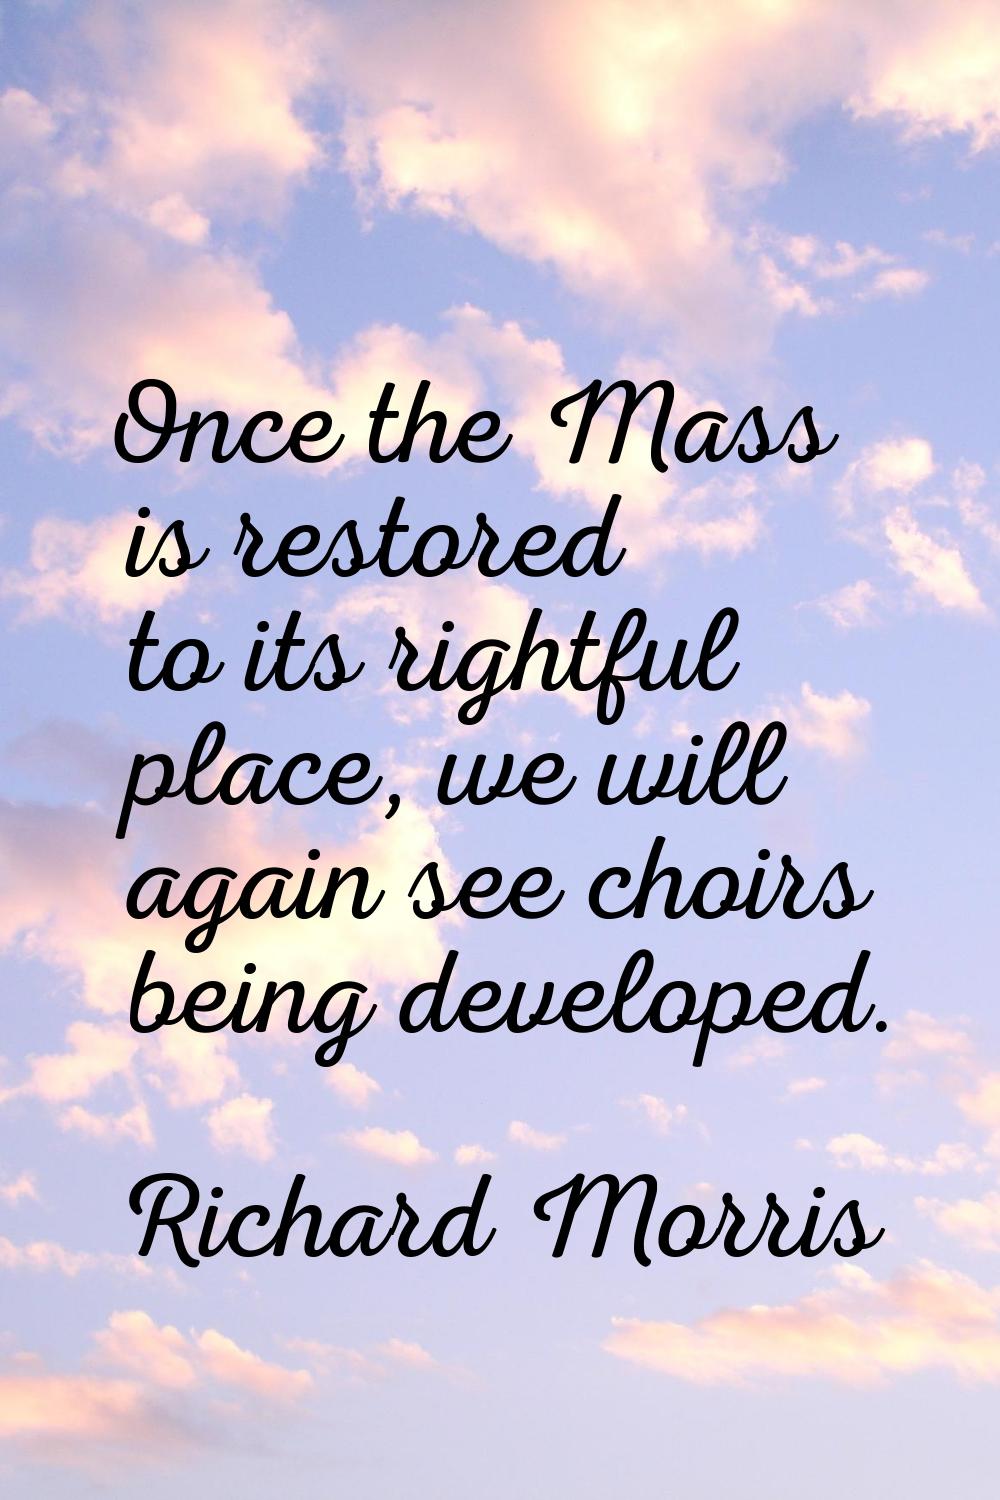 Once the Mass is restored to its rightful place, we will again see choirs being developed.